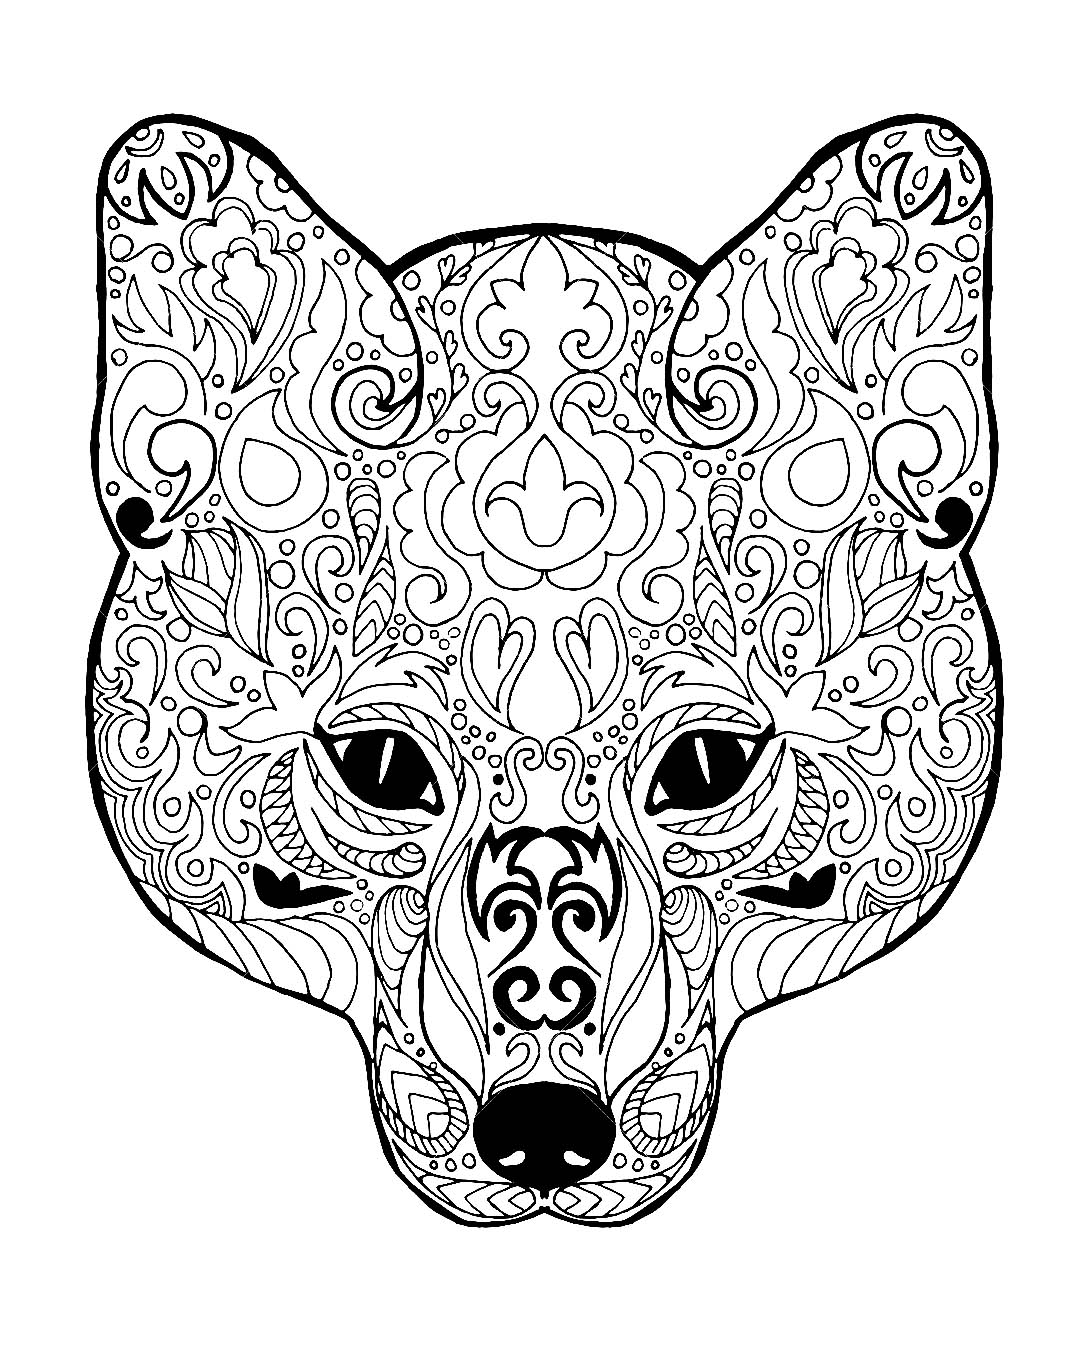 Fox head with simple patterns